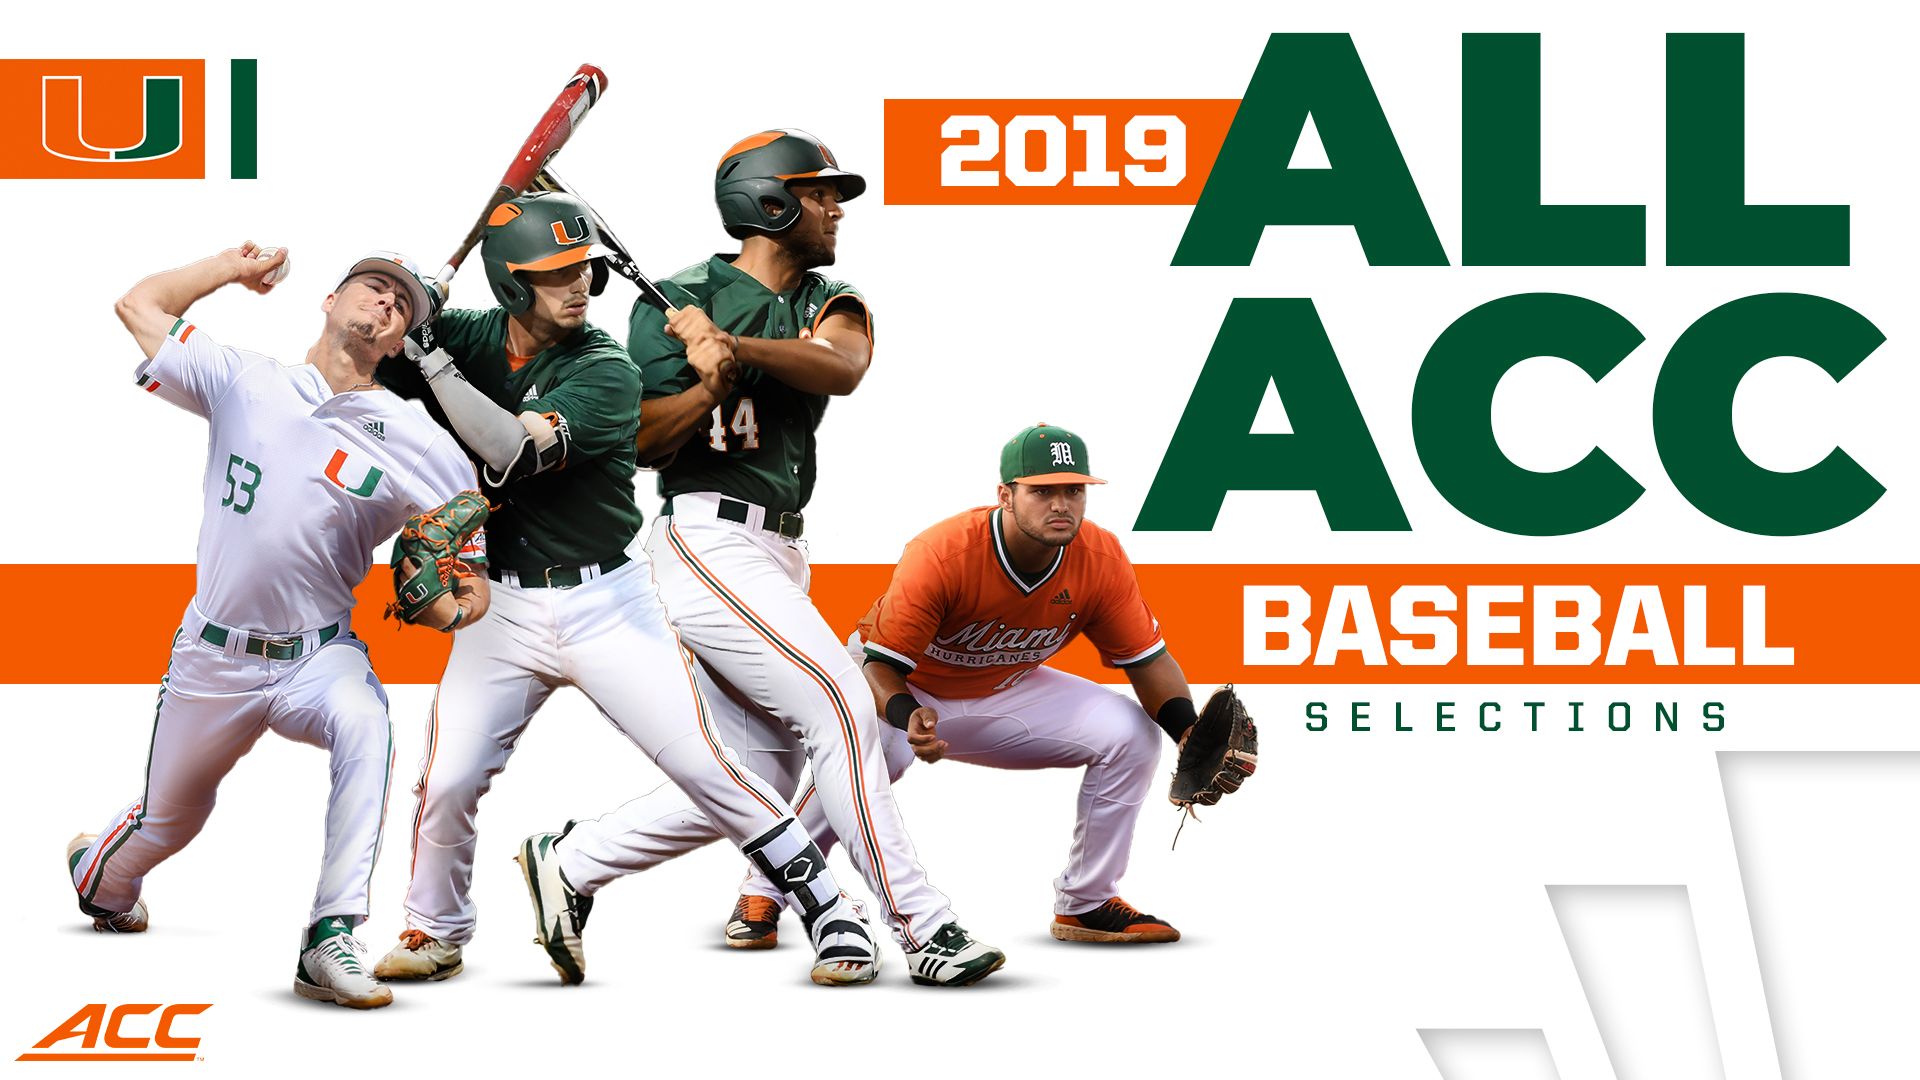 Four Hurricanes Named to All-ACC Baseball Teams